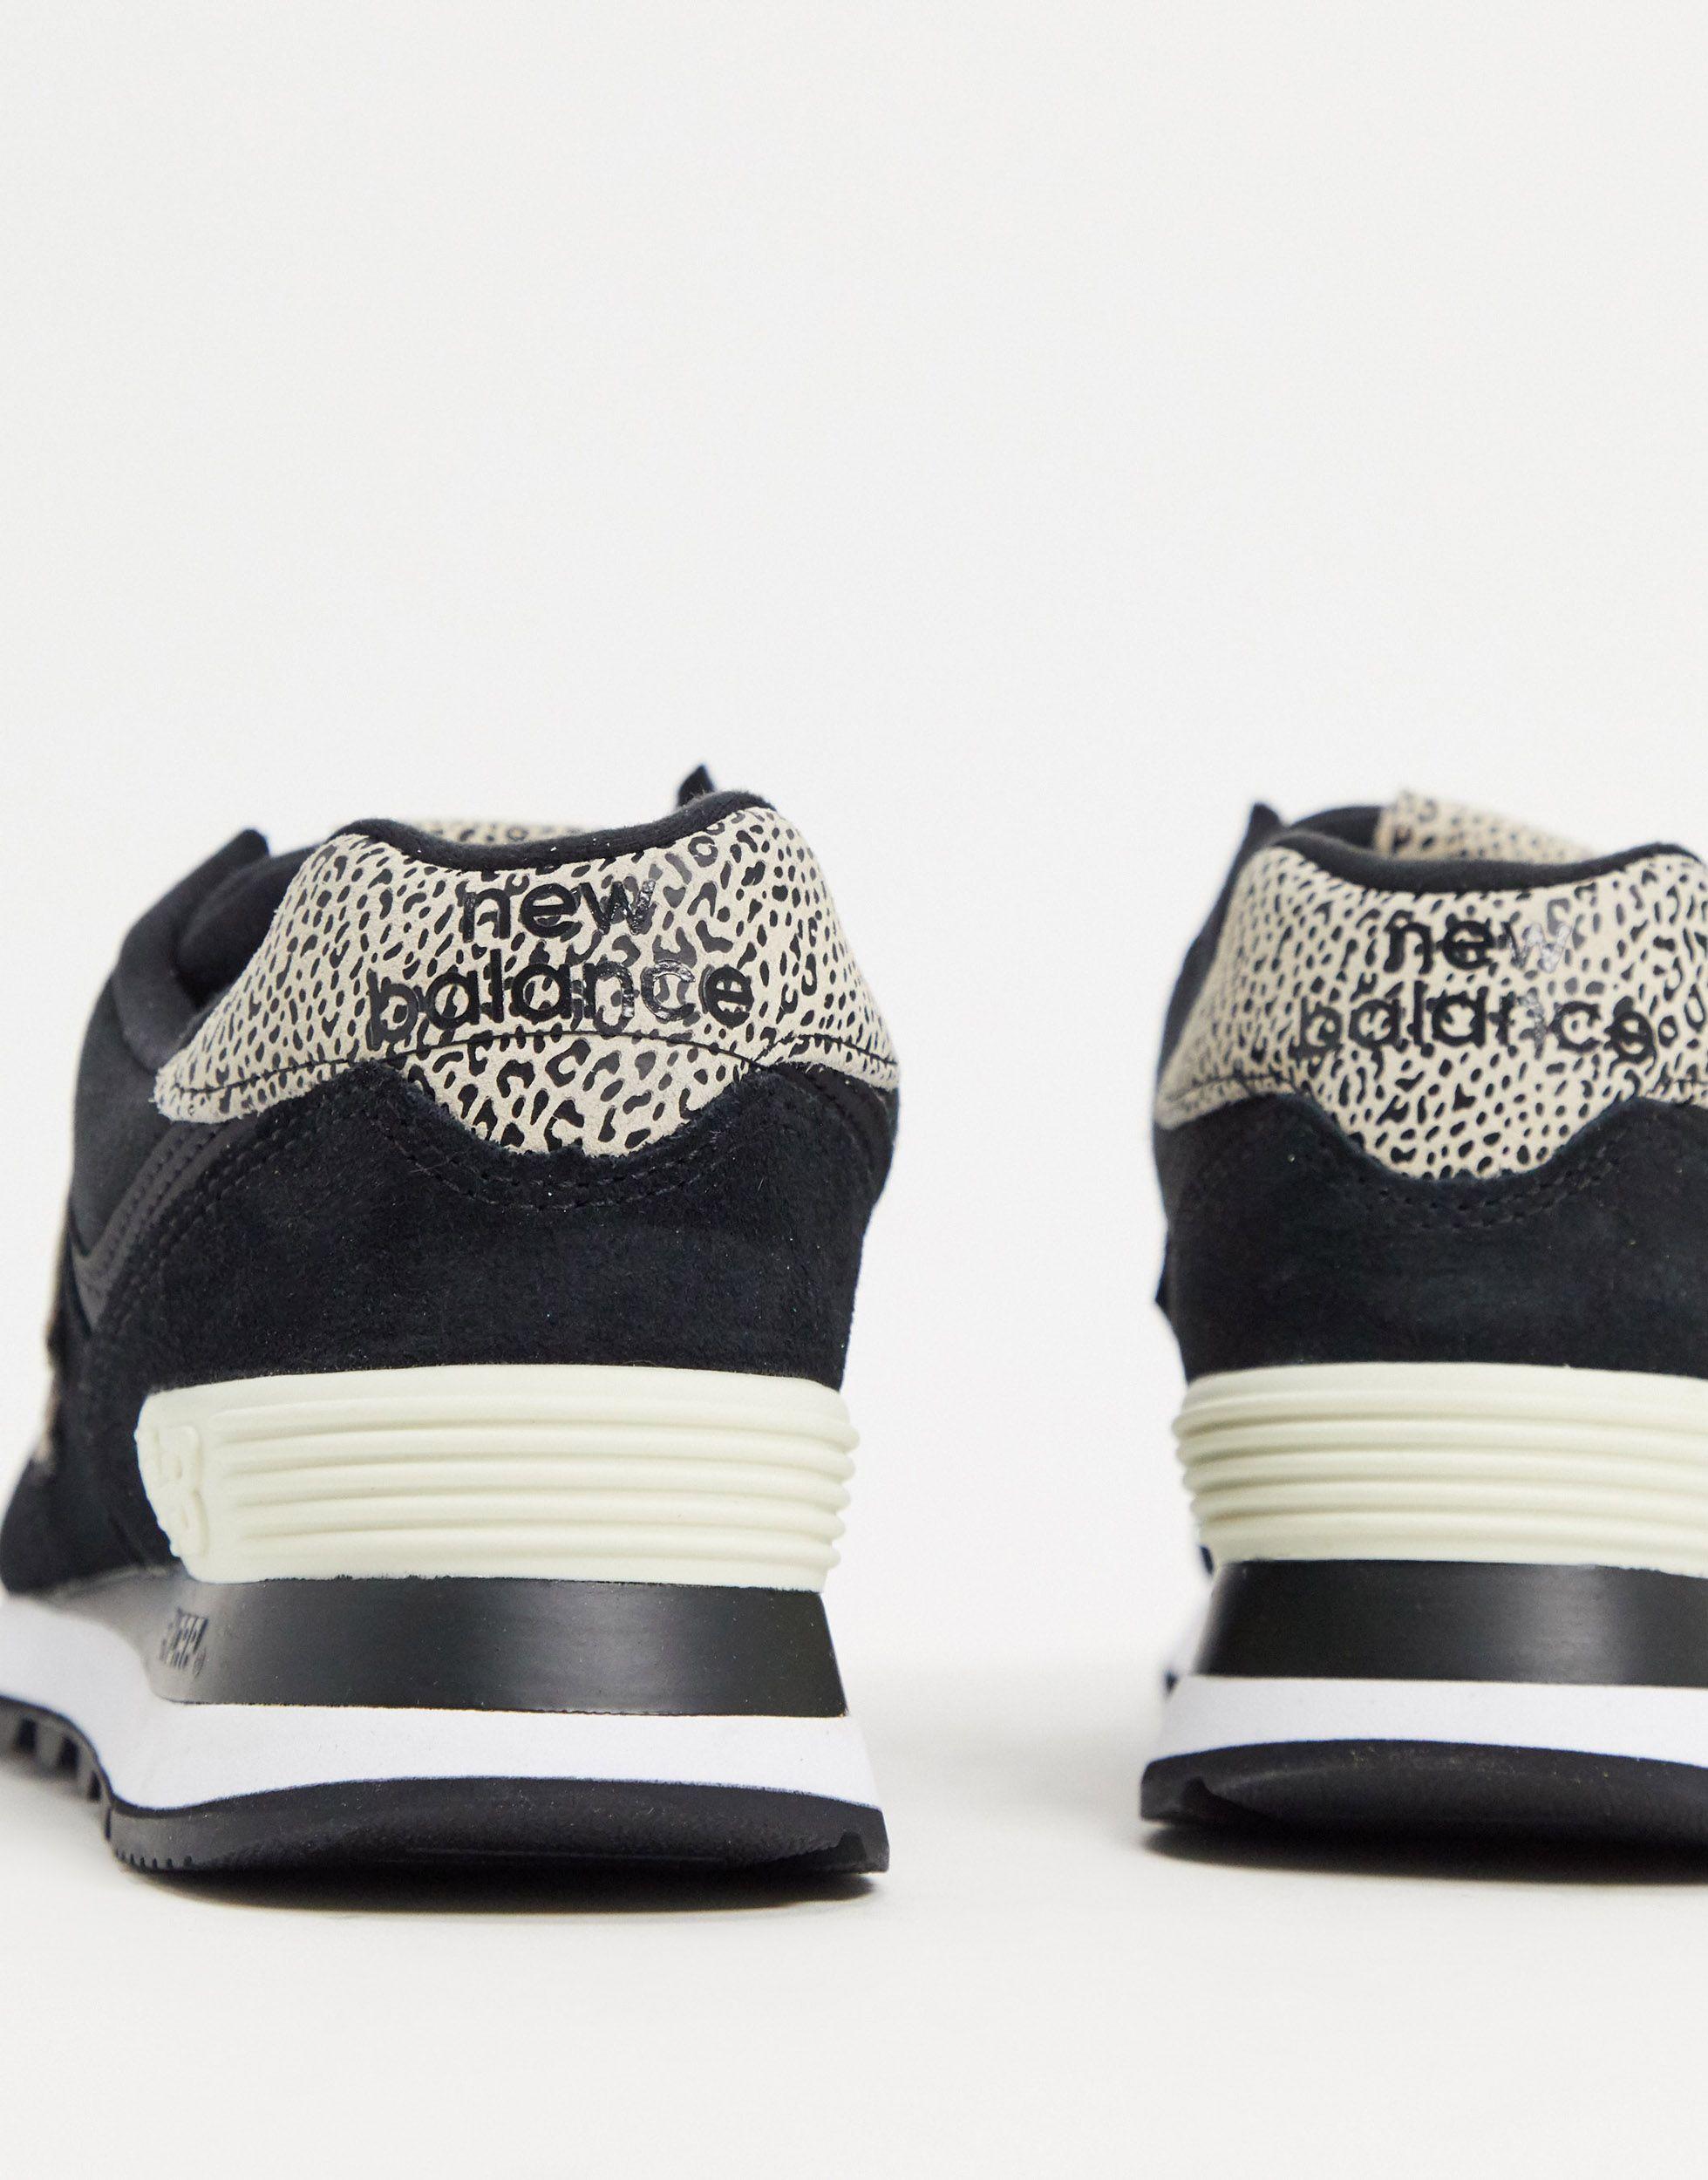 New Balance 574 Animal Print Trainers in Black | Lyst